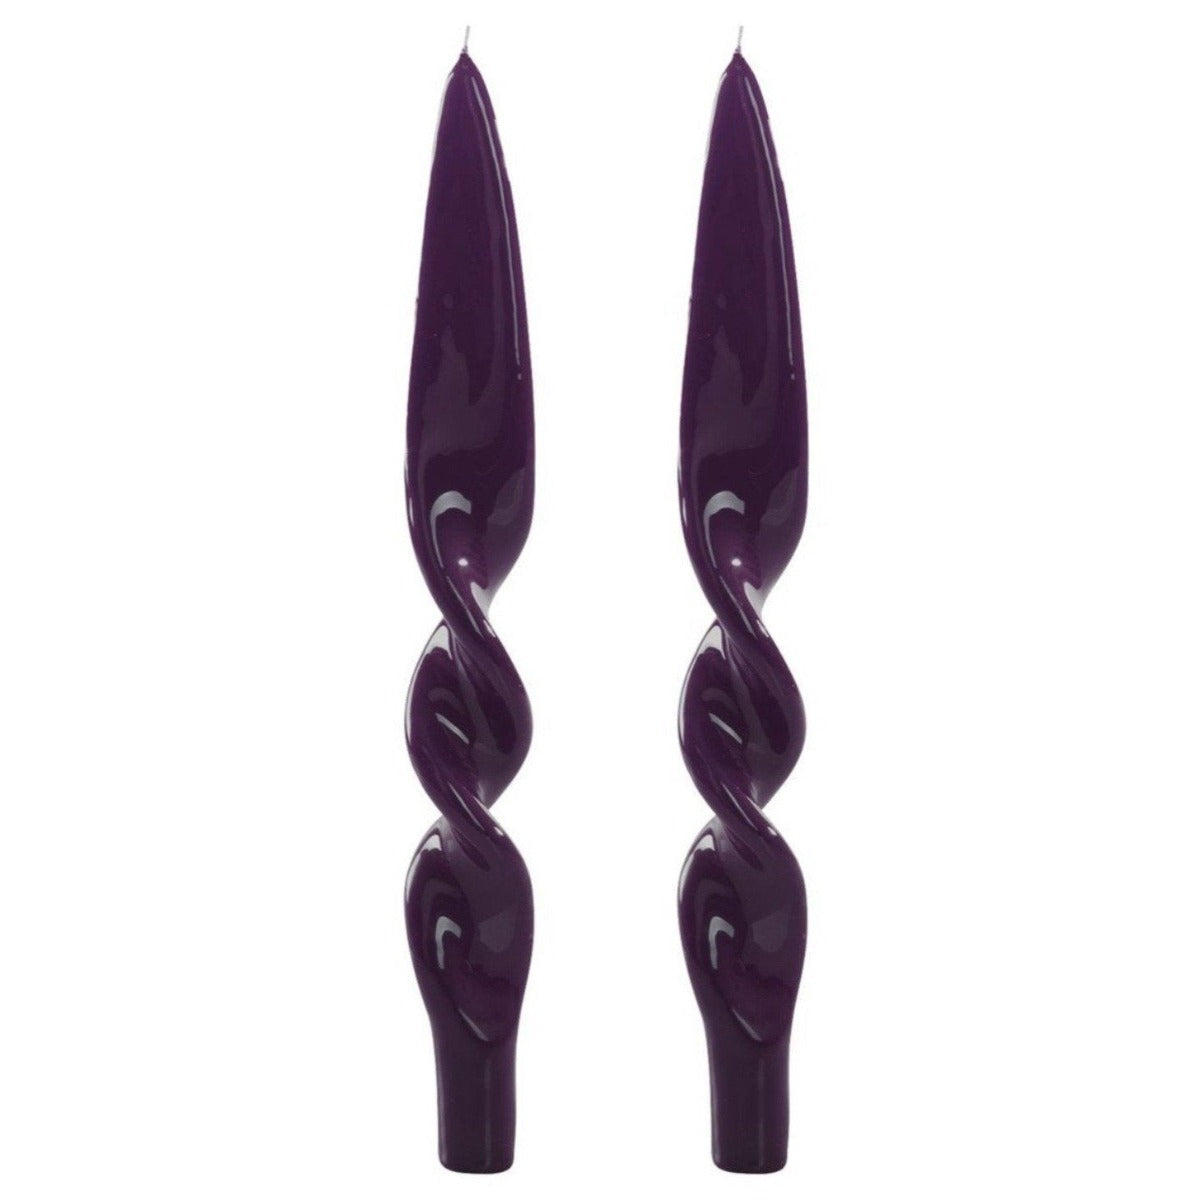 Lacquer Twist Candle Pair-Bespoke Designs